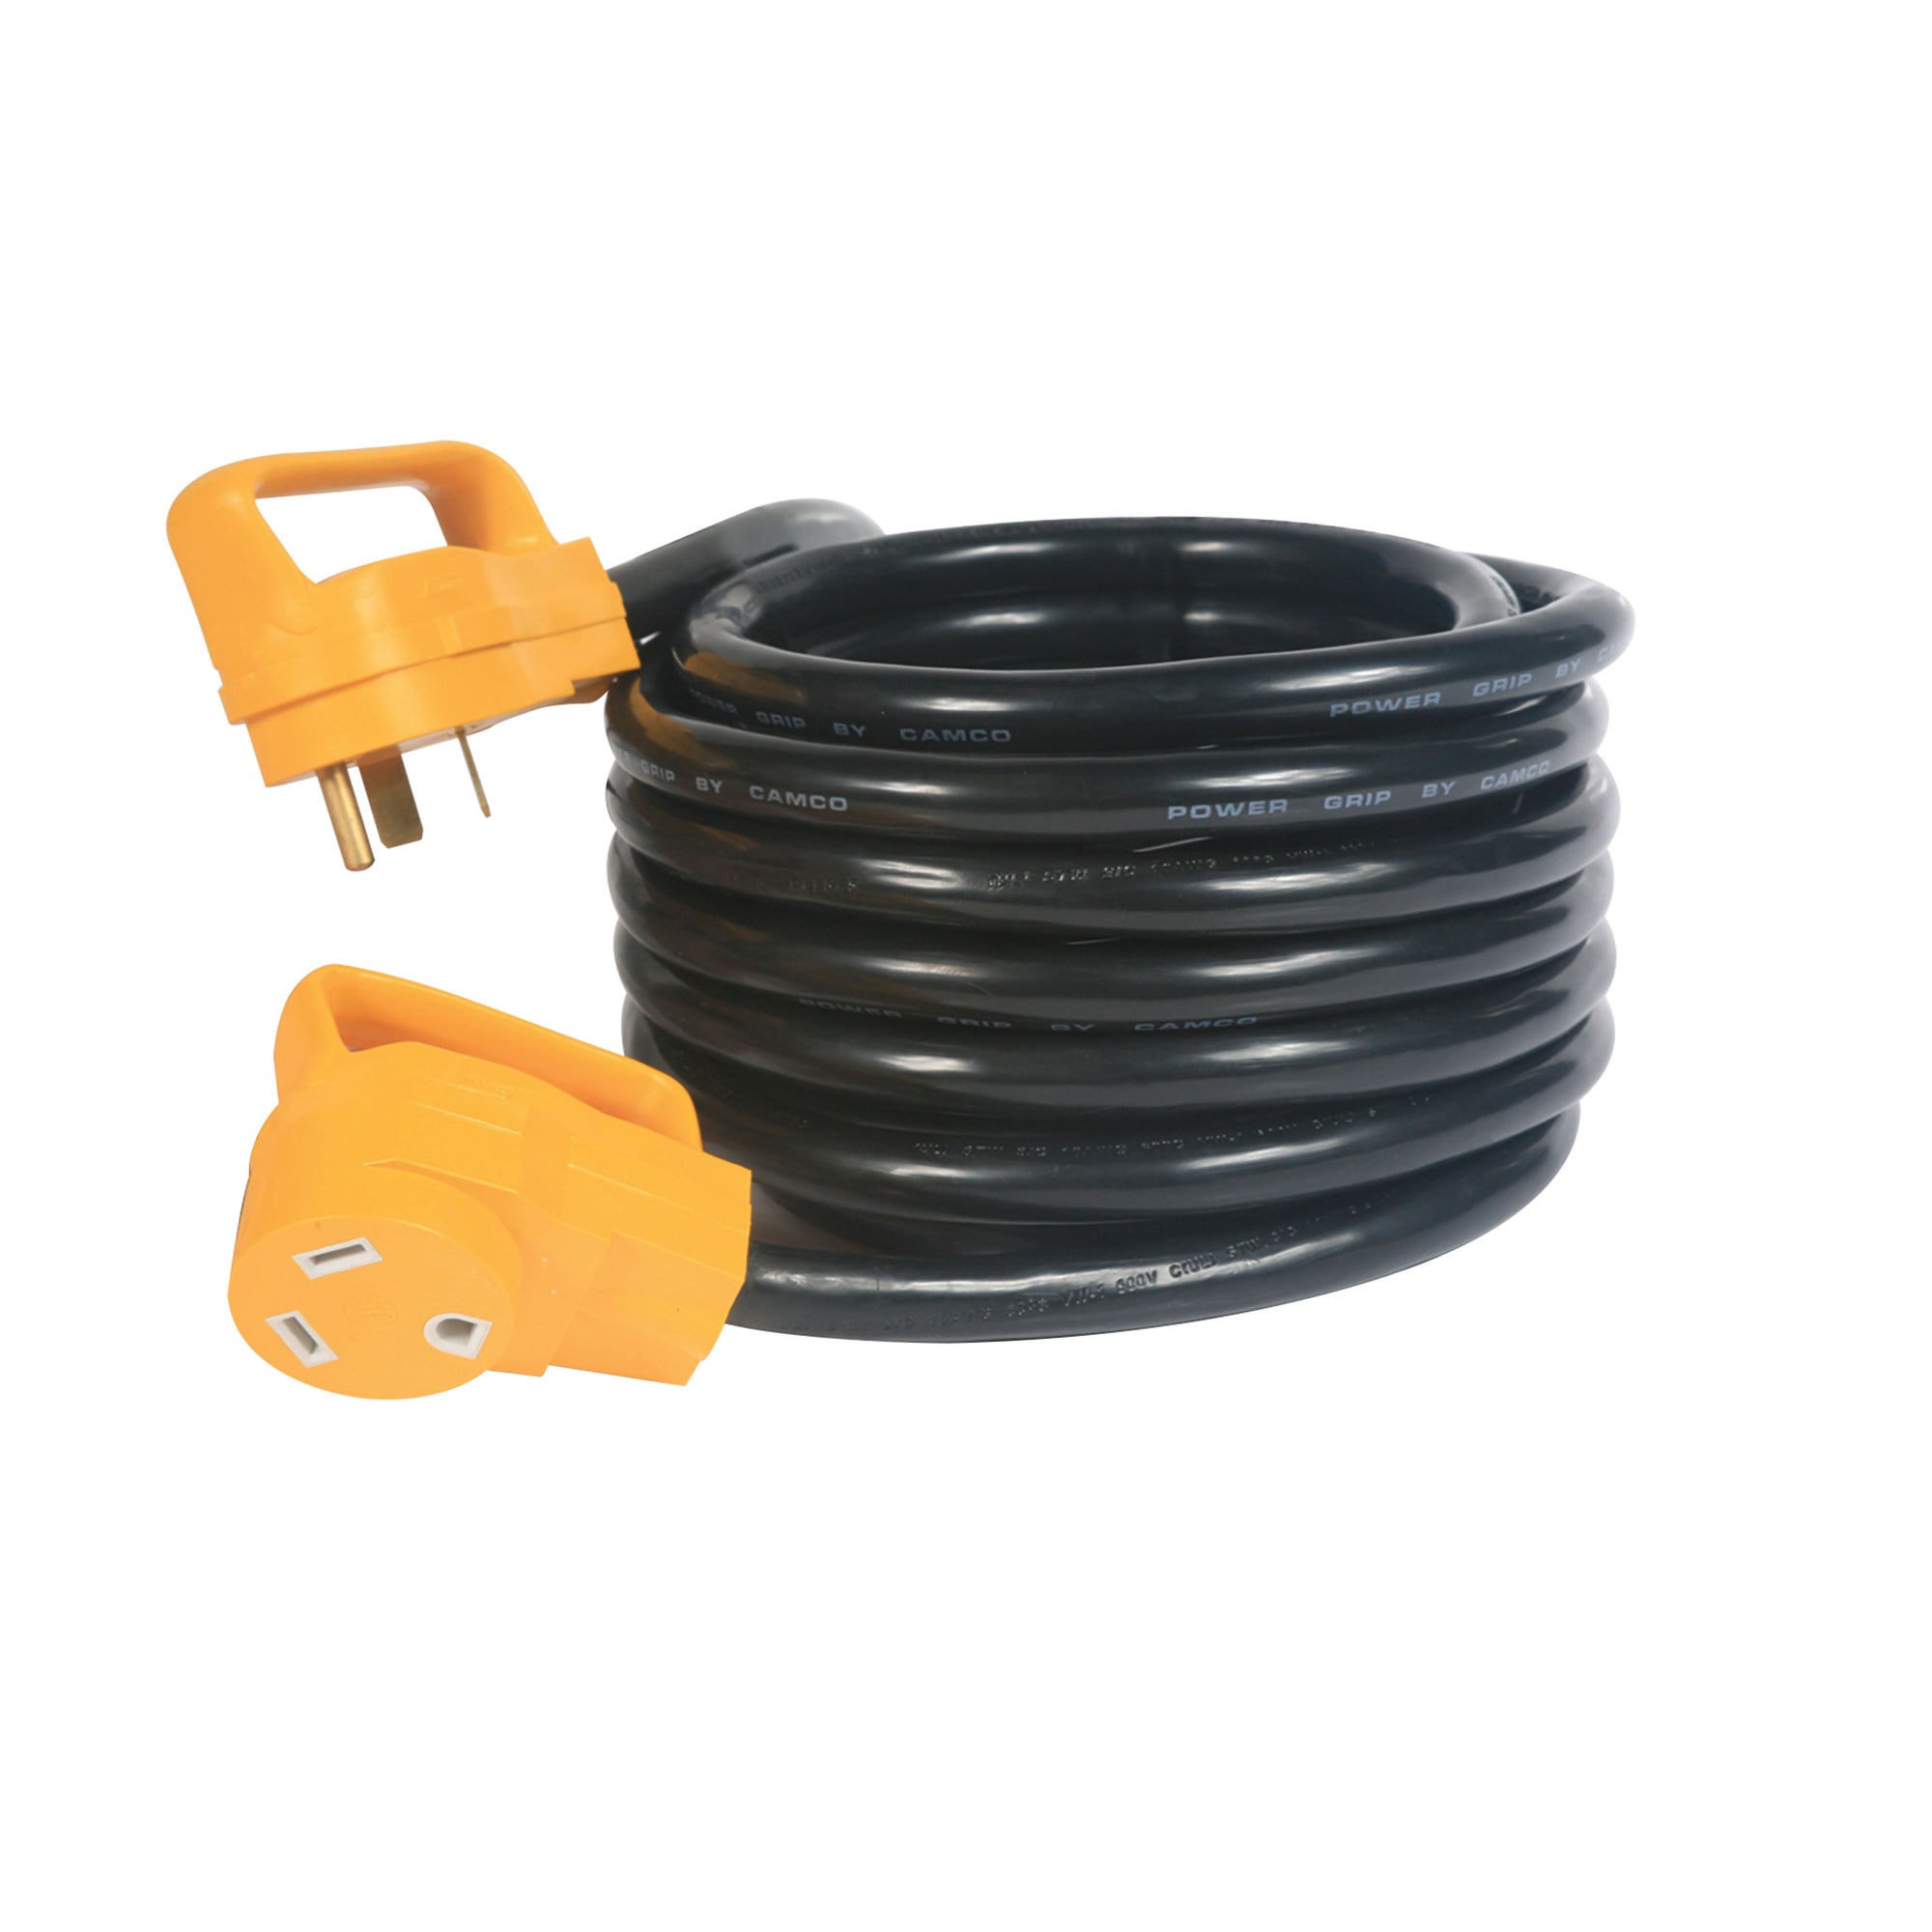 Camco 55191 30 Amp Power Grip Extension' Cord - 25 Feet